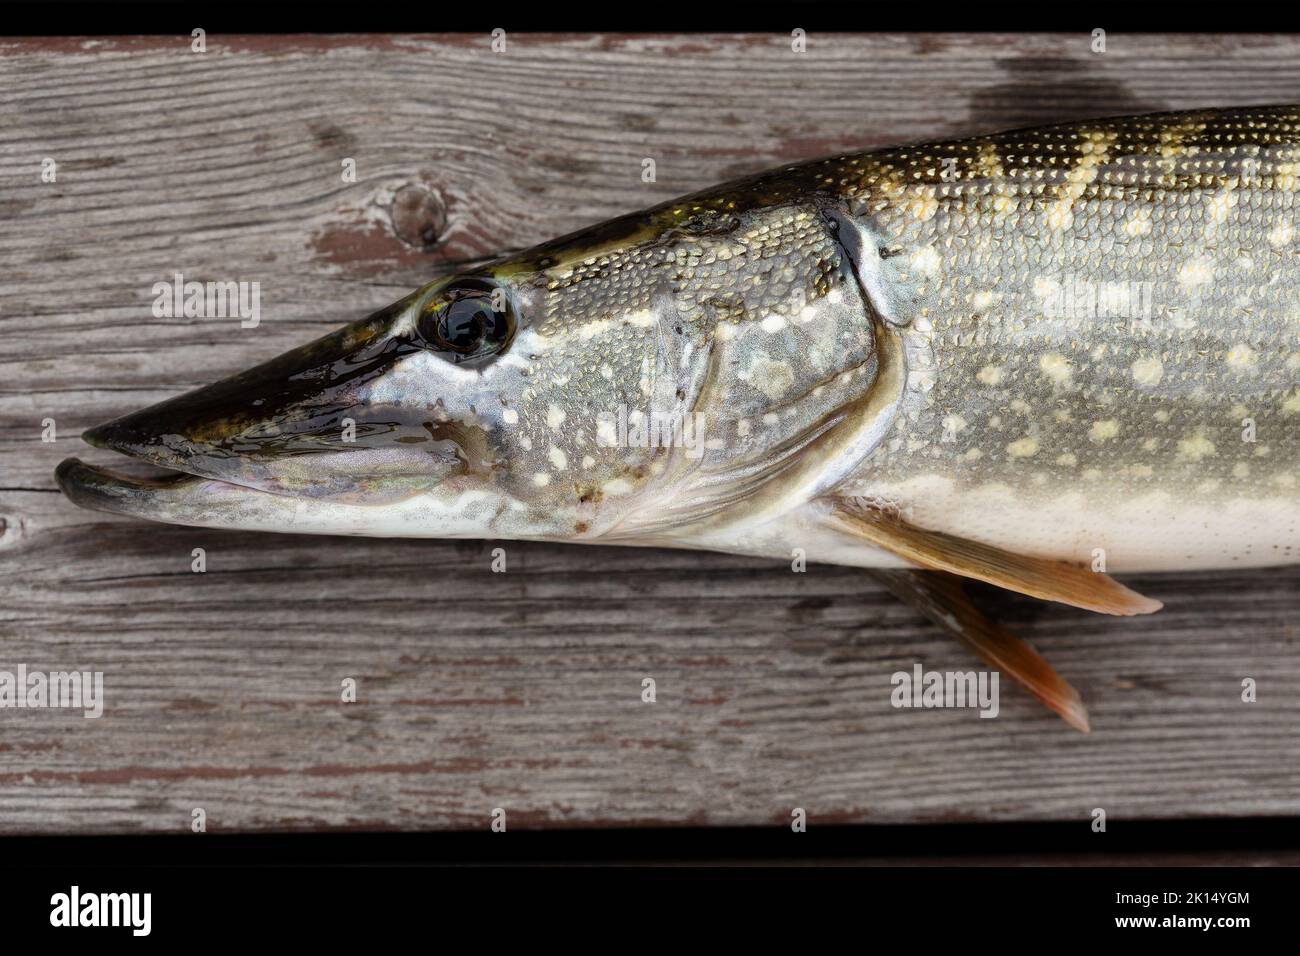 Freshly caught big wild pike, wooden background. A freshwater fish with brown fins, scales silver yellow green dark colors, typical pattern coloration Stock Photo